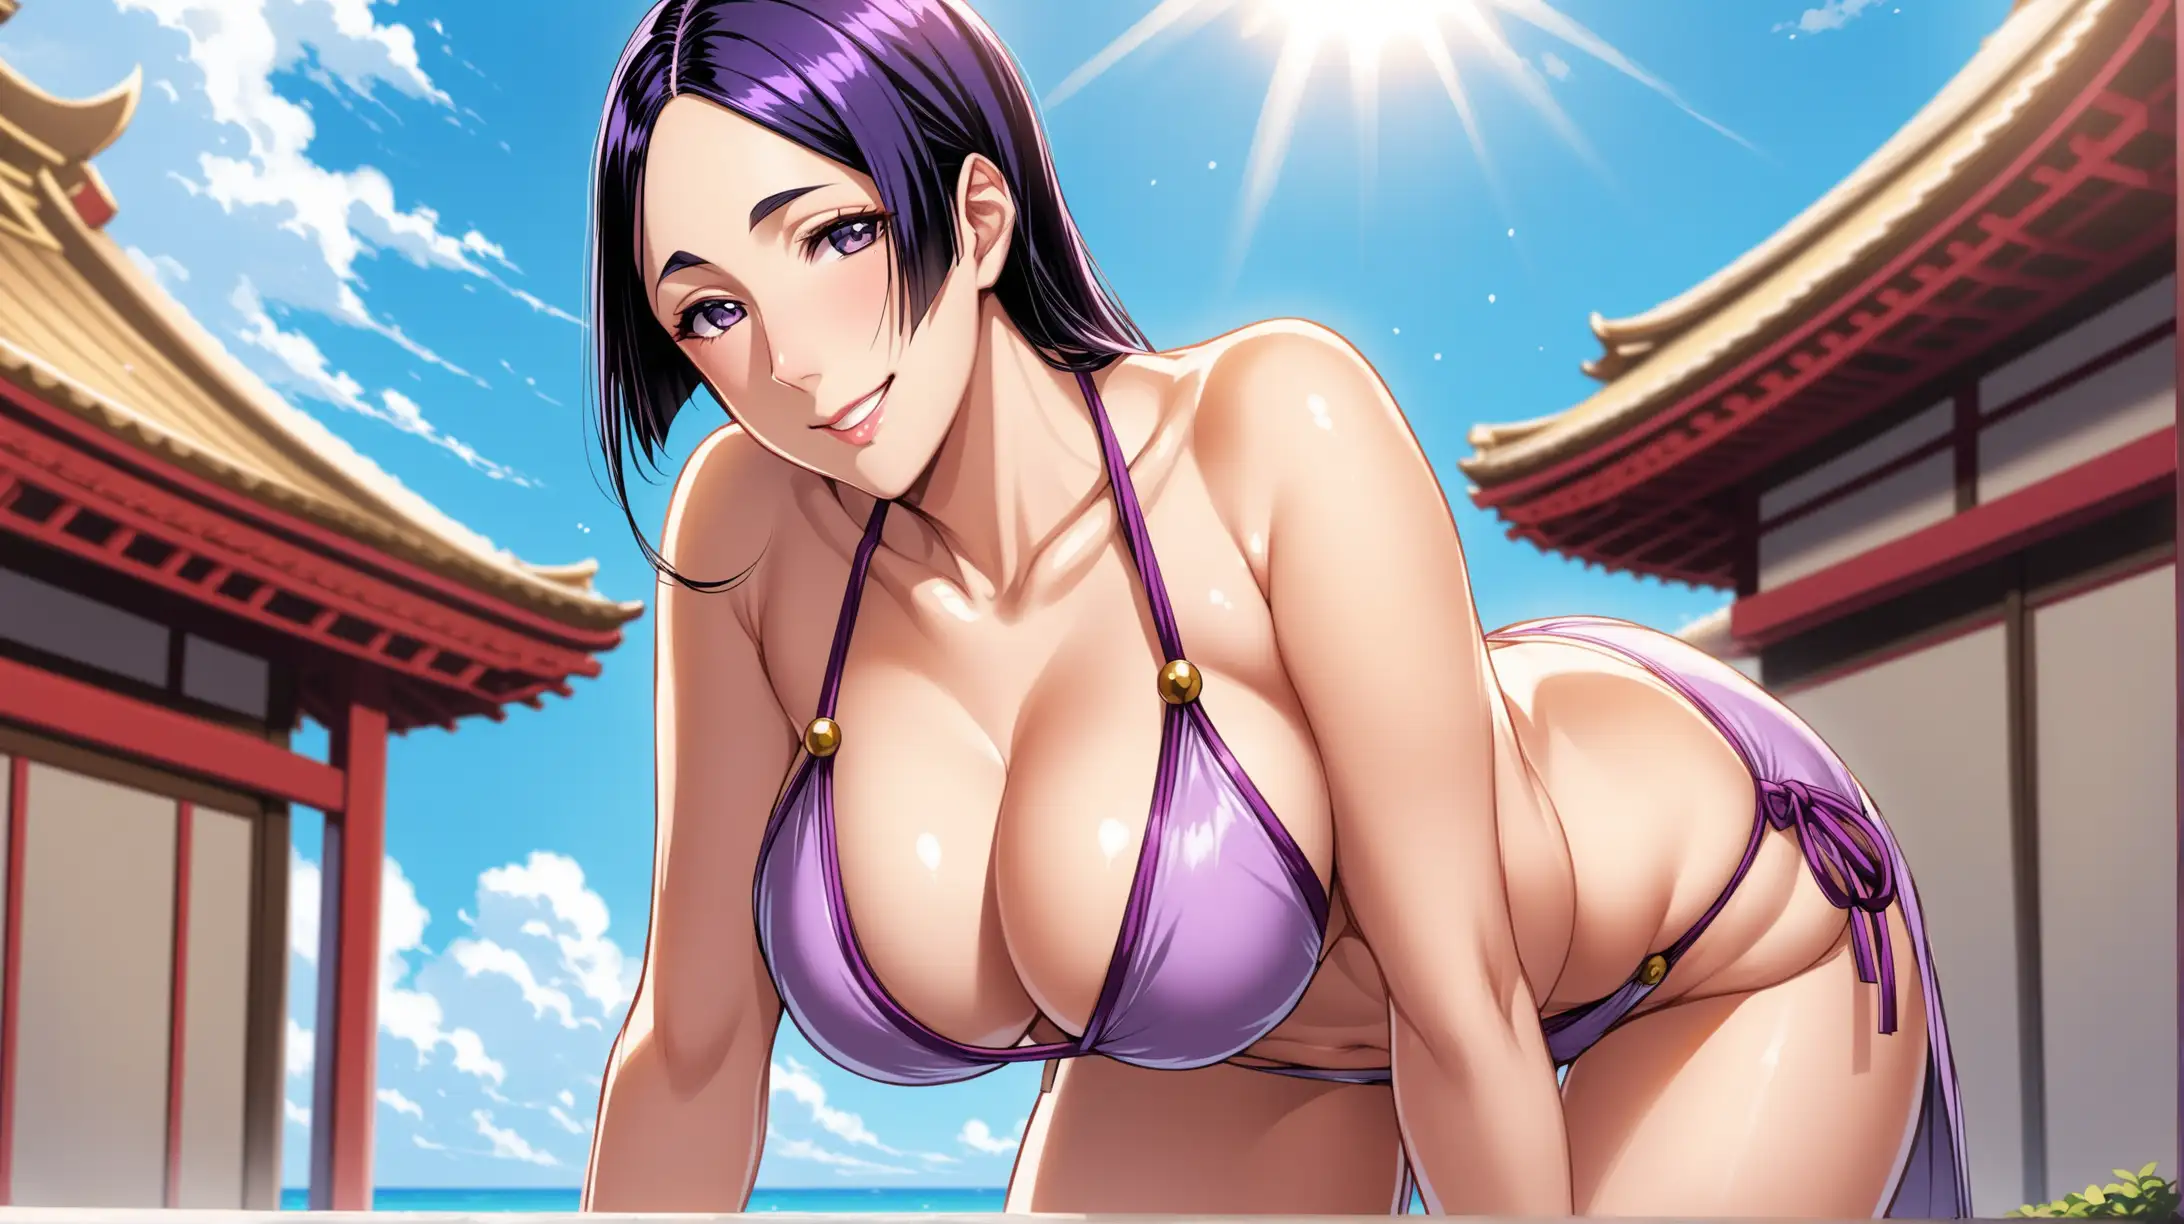 Draw the character Minamoto no Raikou, high quality, standing in a seductive pose, on a sunny day, wearing a swimsuit, leaning forward, smiling at the viewer